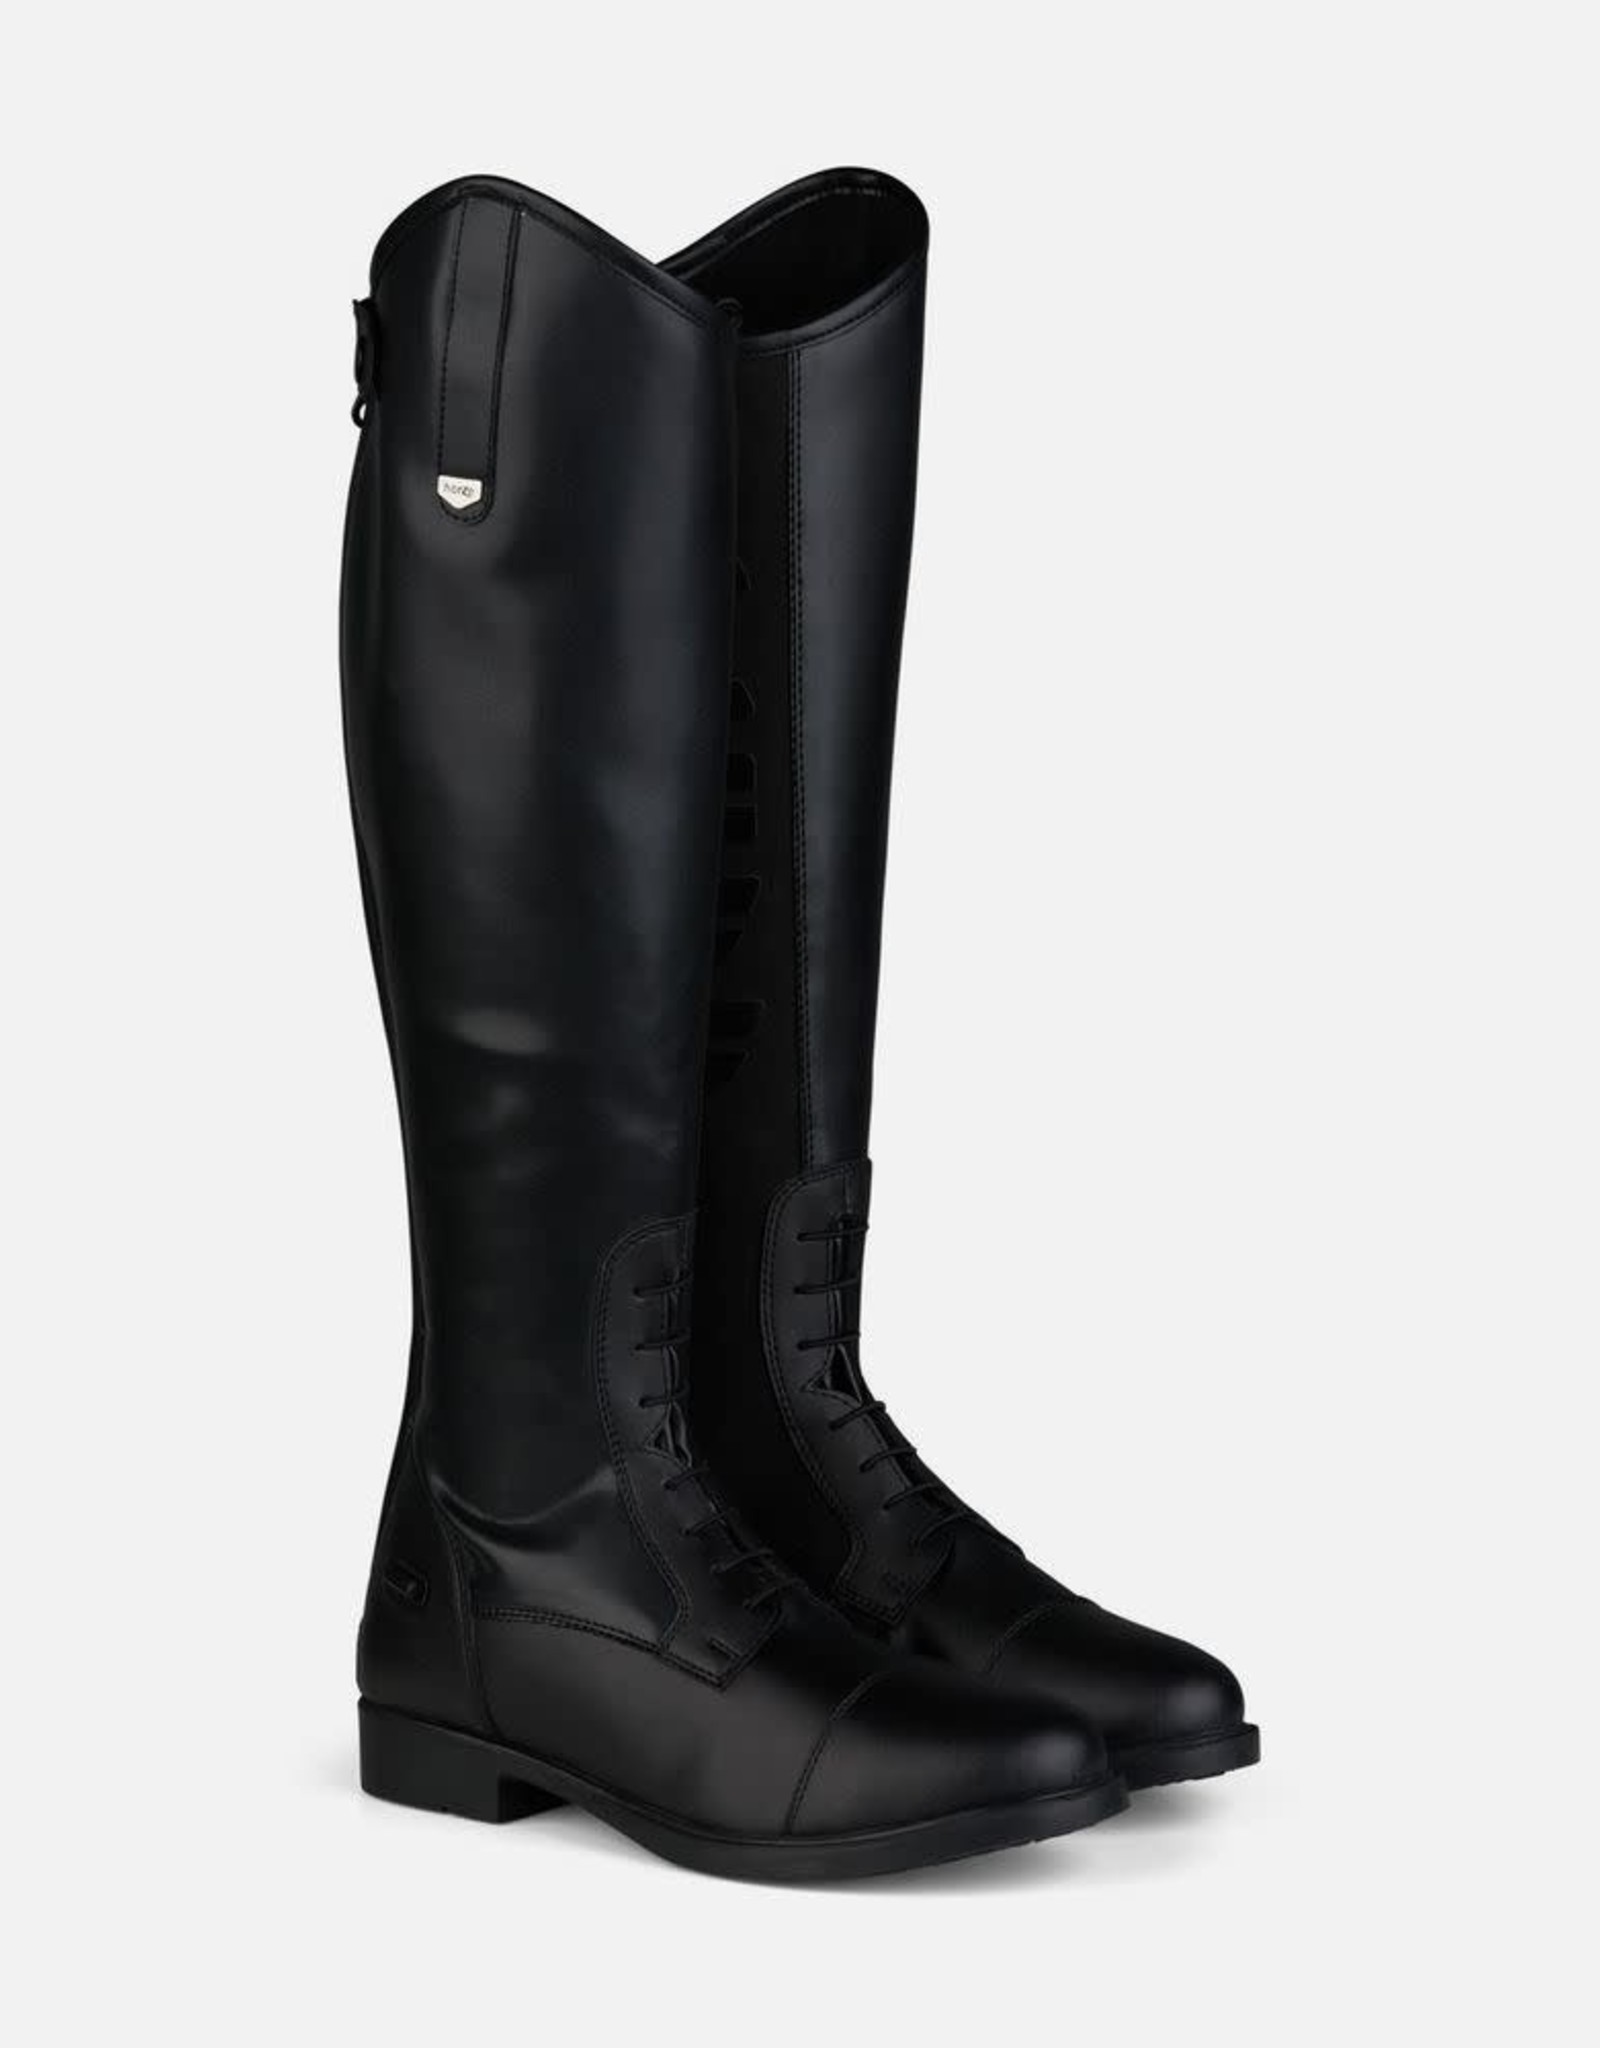 HORZE LIMITED EDITION WOMEN'S ROVER FIELD BOOT